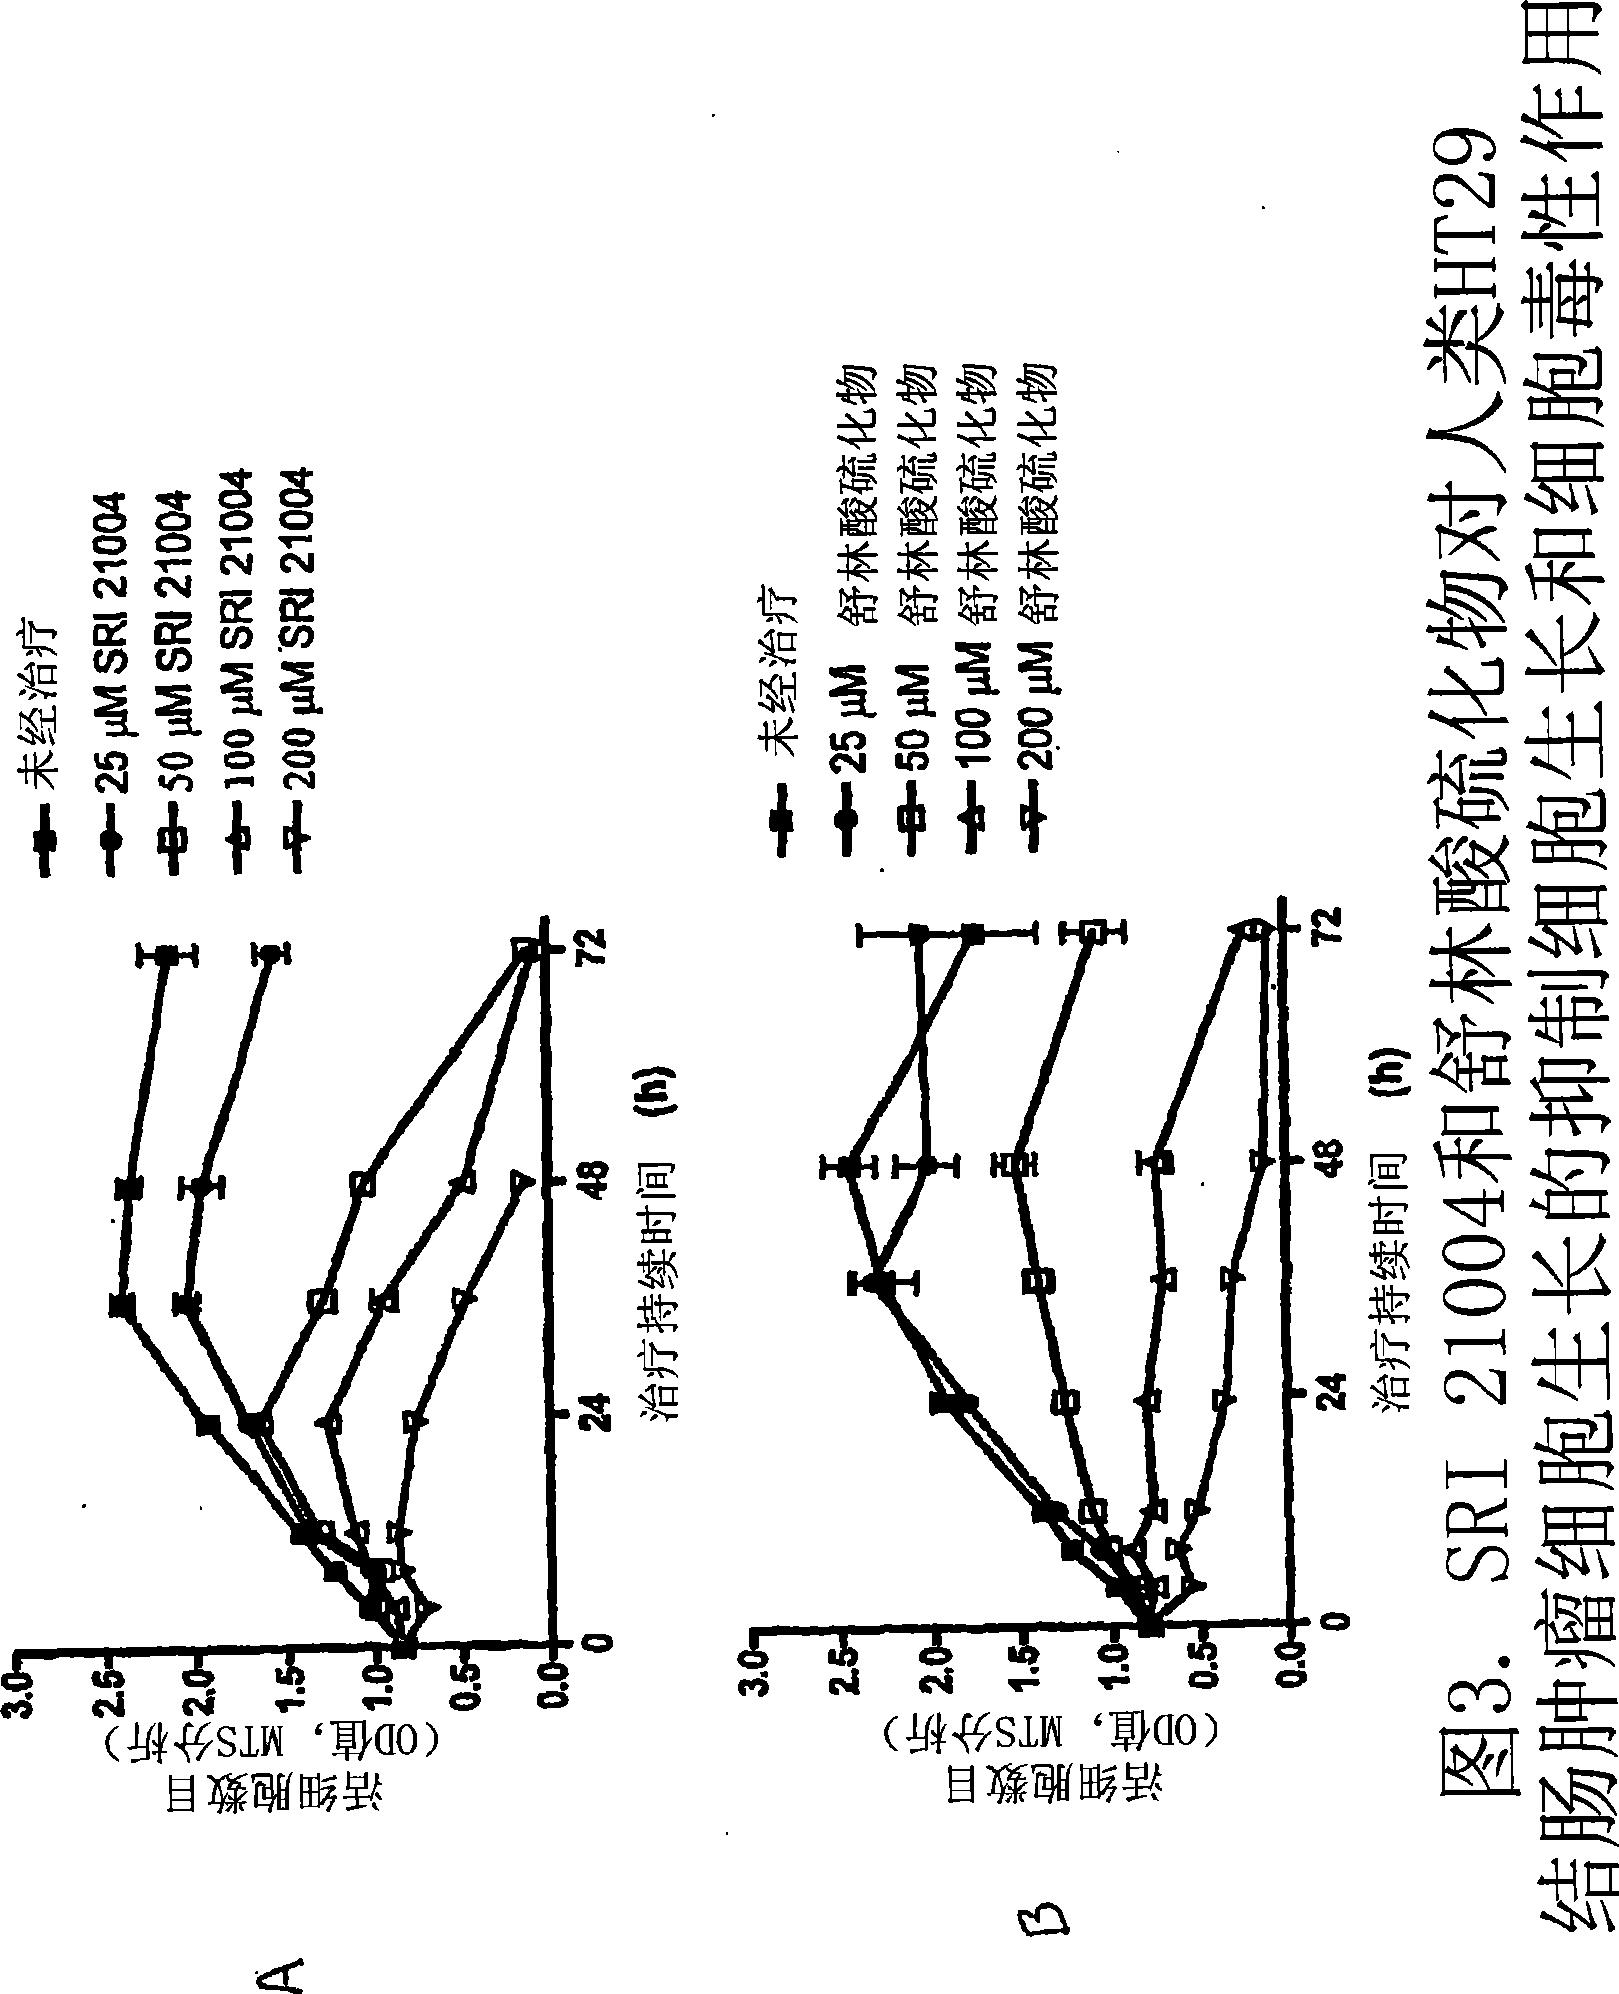 Derivatives of sulindac, use thereof and preparation thereof